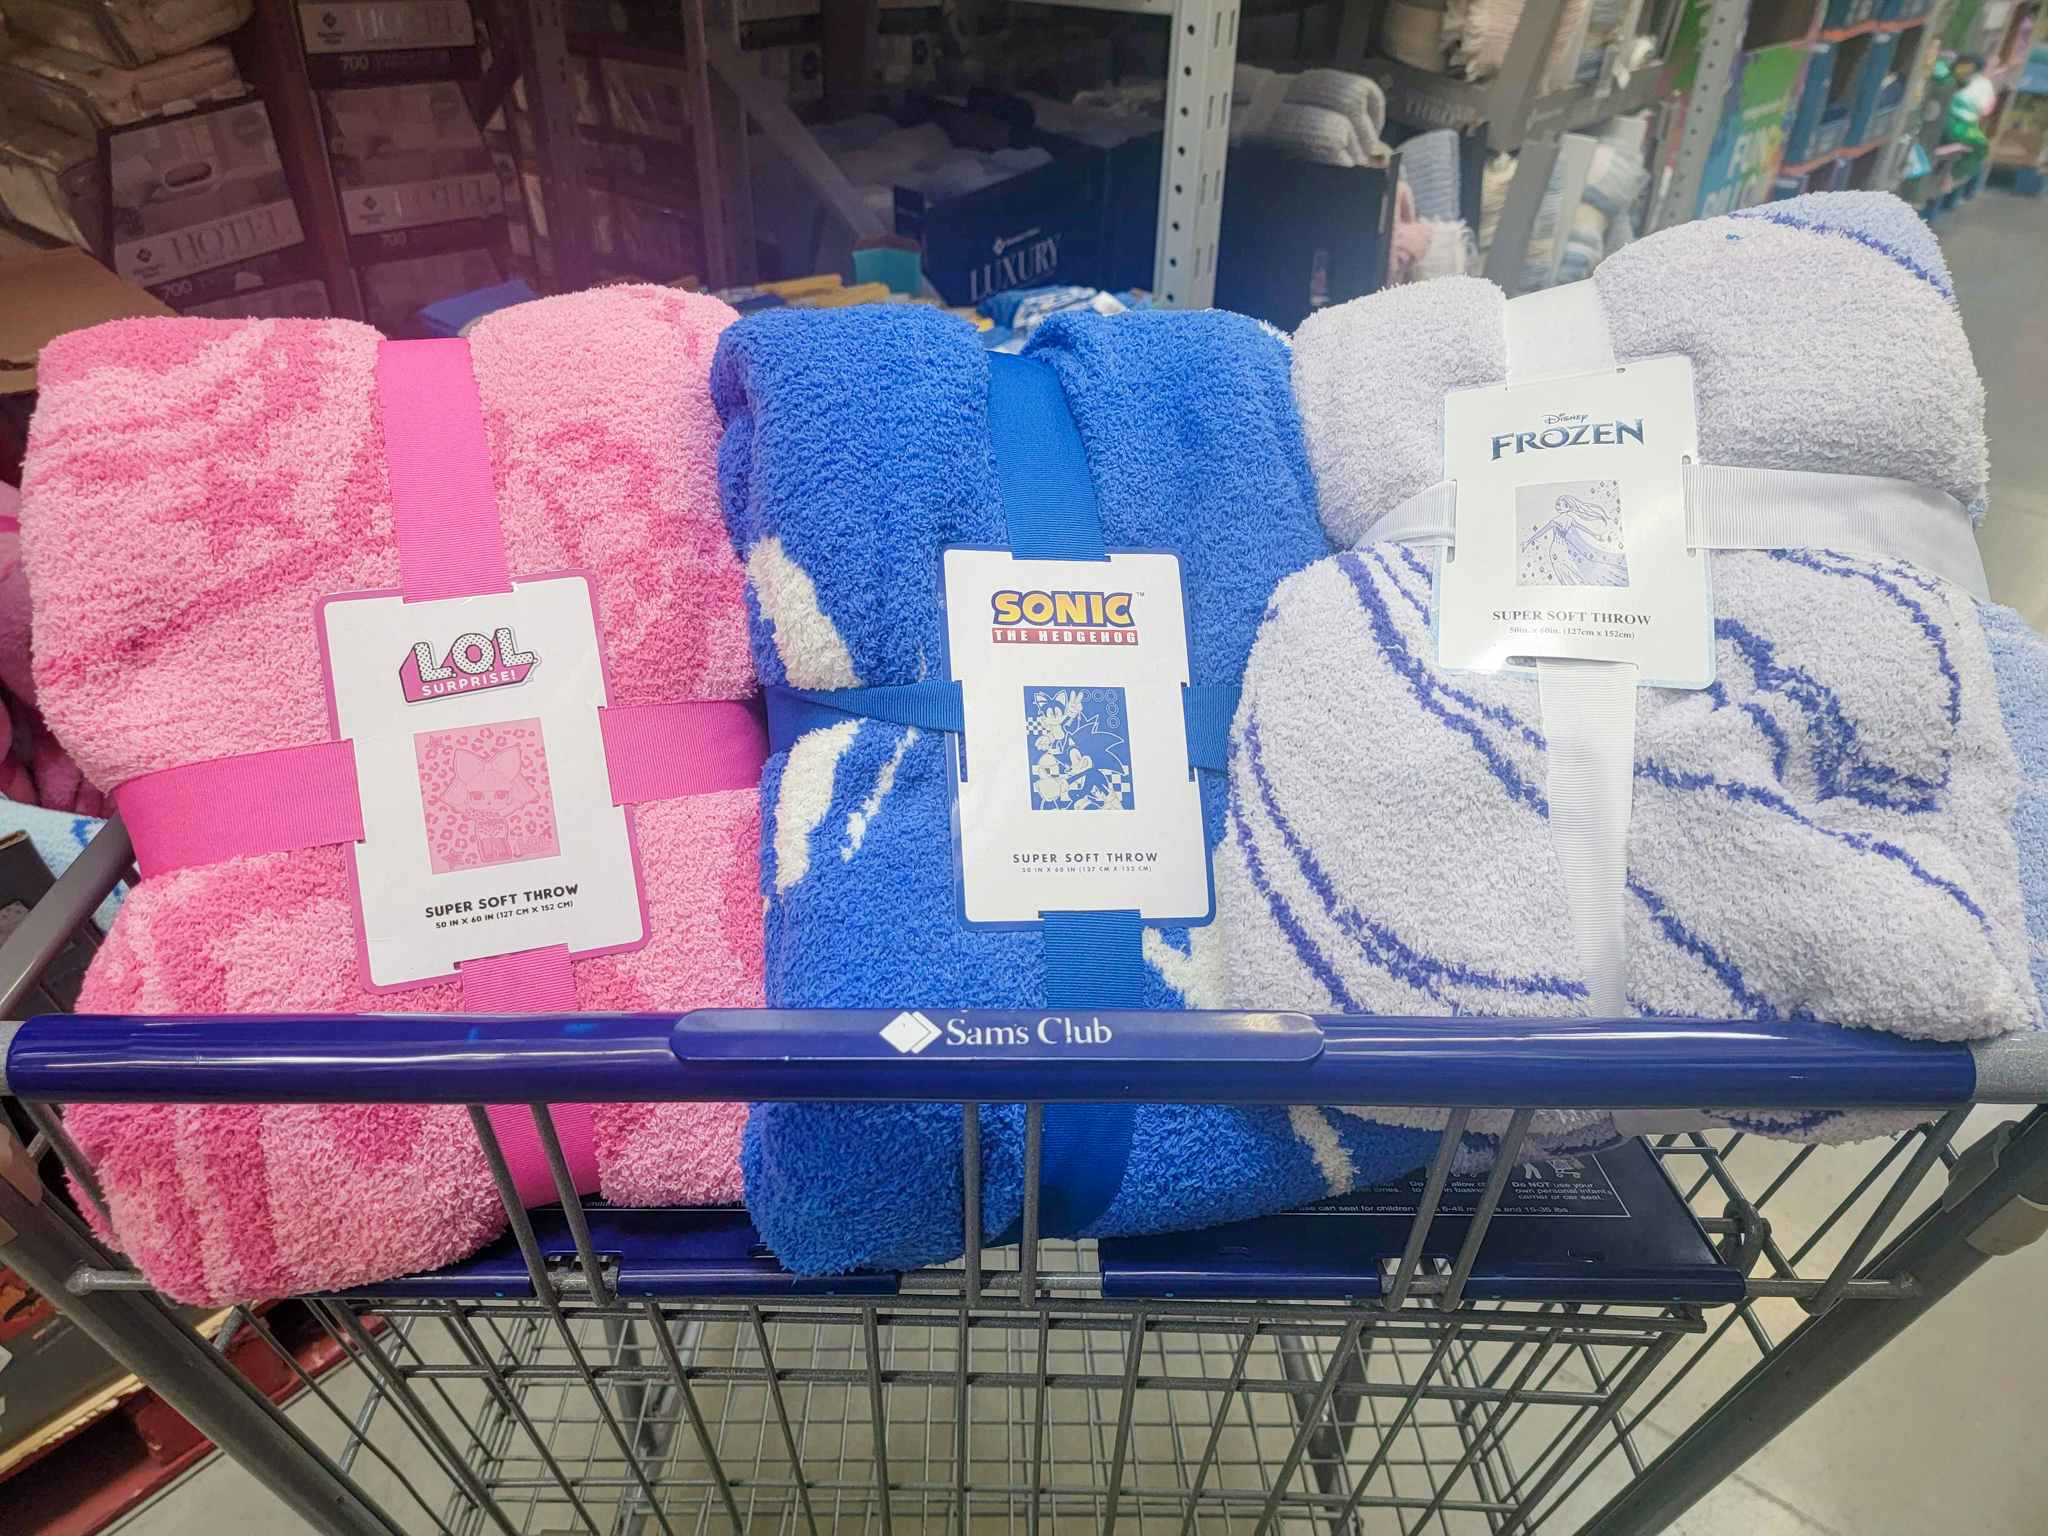 LOL surprise, sonic, and disney frozen throw blankets in a cart